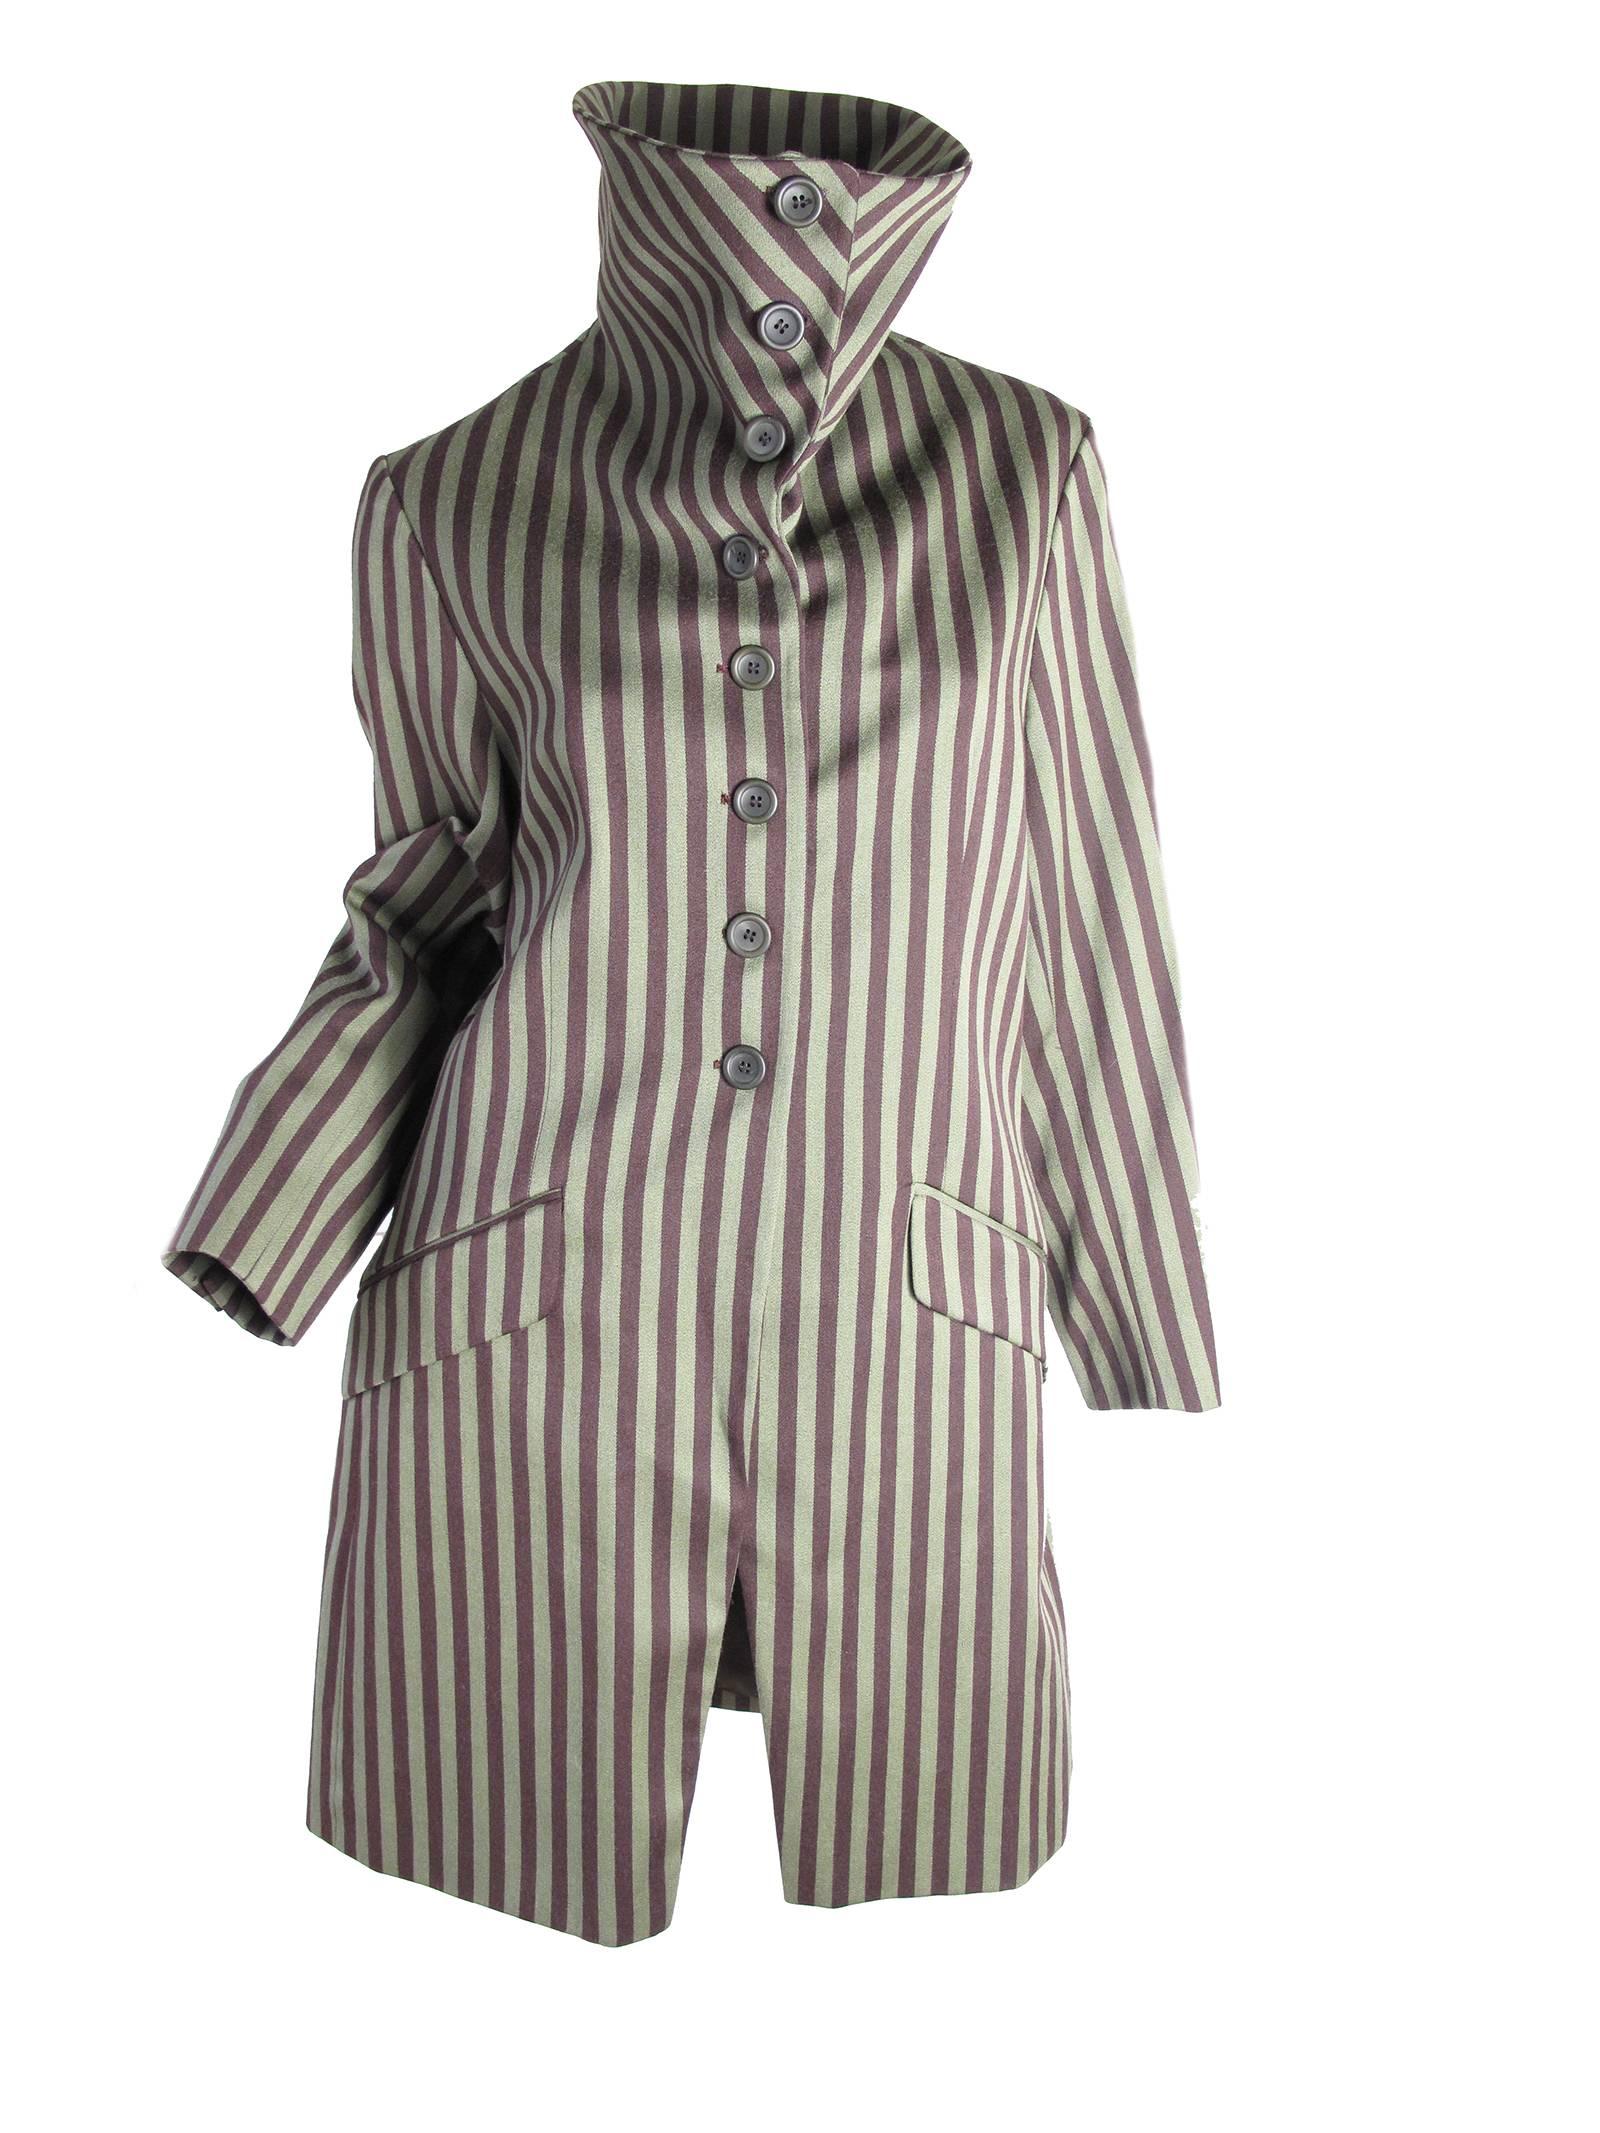 Early Dries Van Noten striped wool and cotton jacket with buttons down the front and extra large collar that can button up around neck.  Condition: Excellent. Size 42/ current US 6 - 8

We accept returns for refund, please see our terms.  We offer